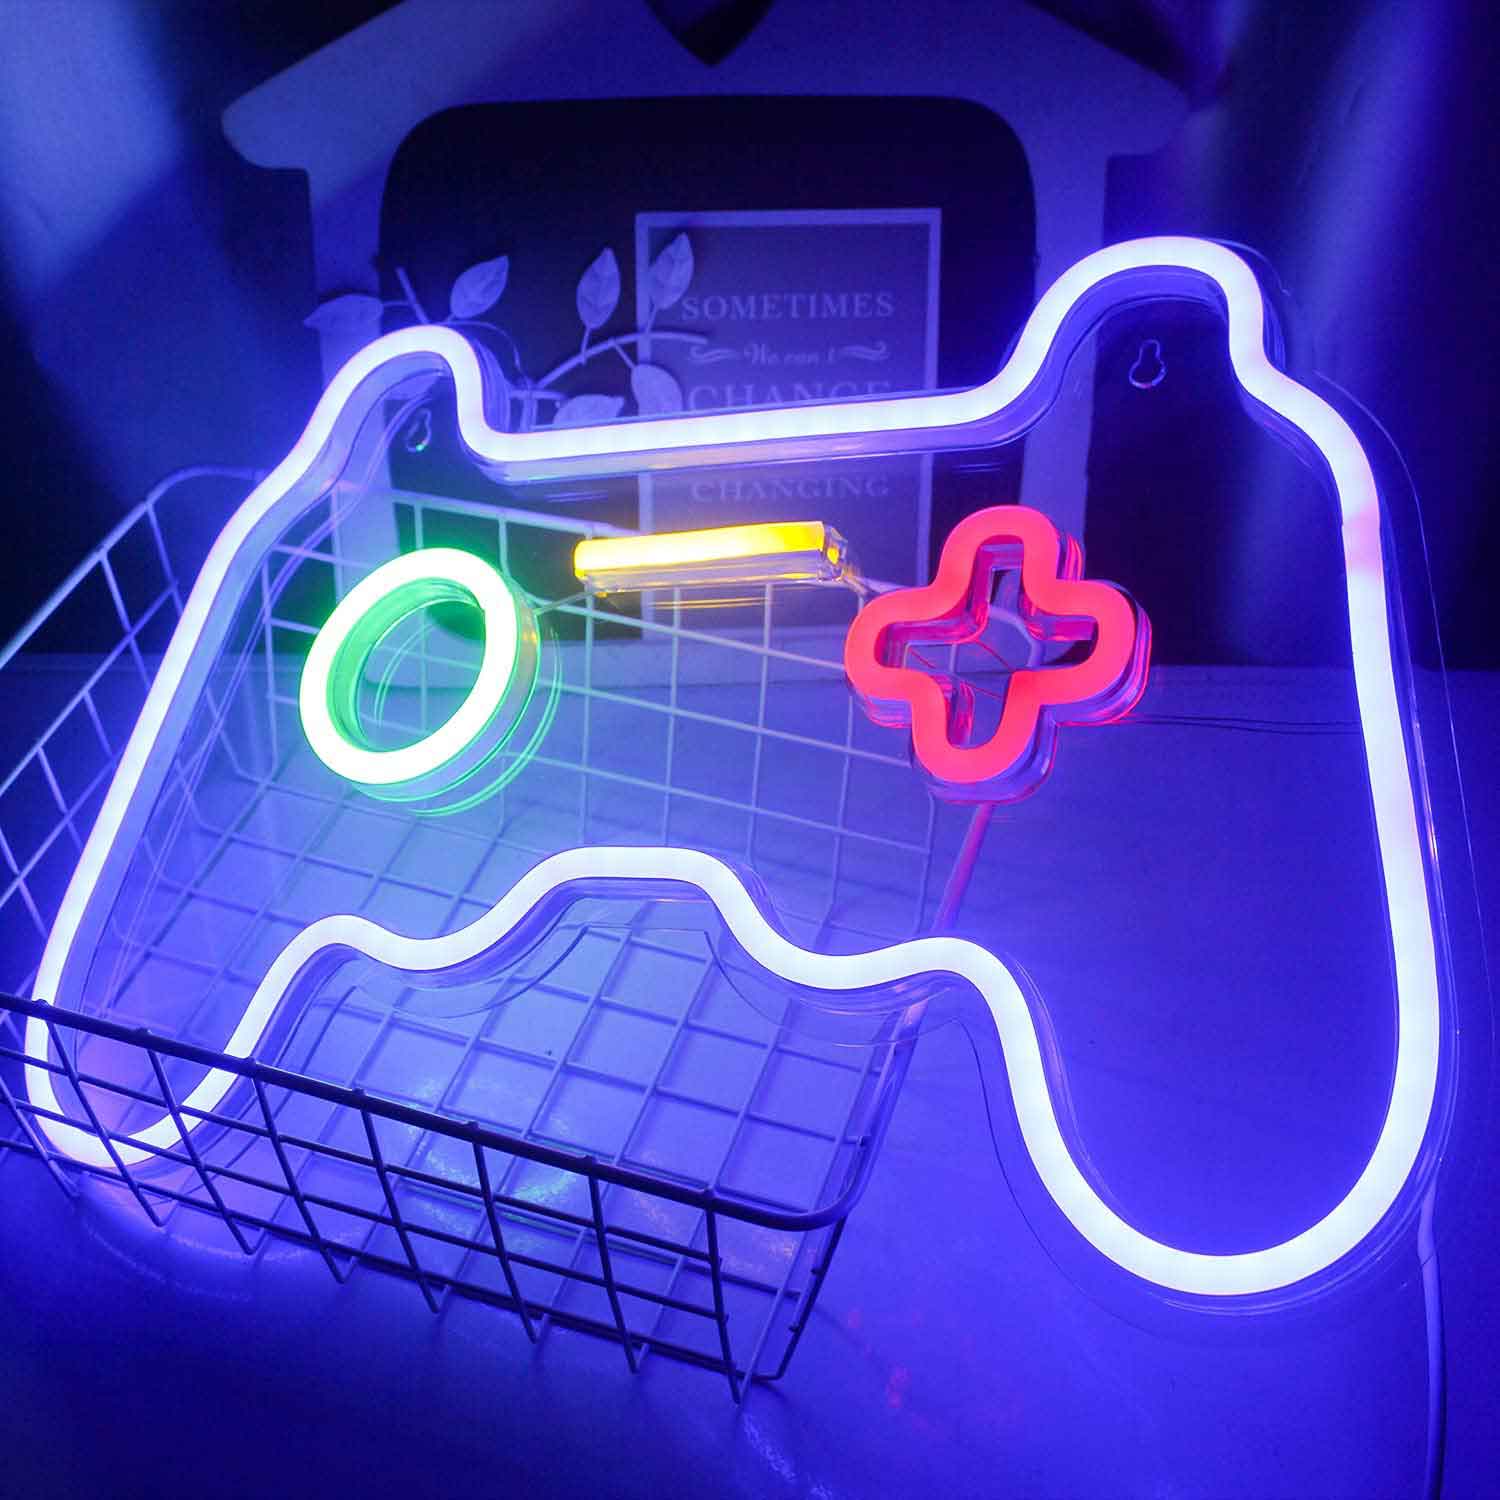 Gaming Console Neon Sign - Neon Light